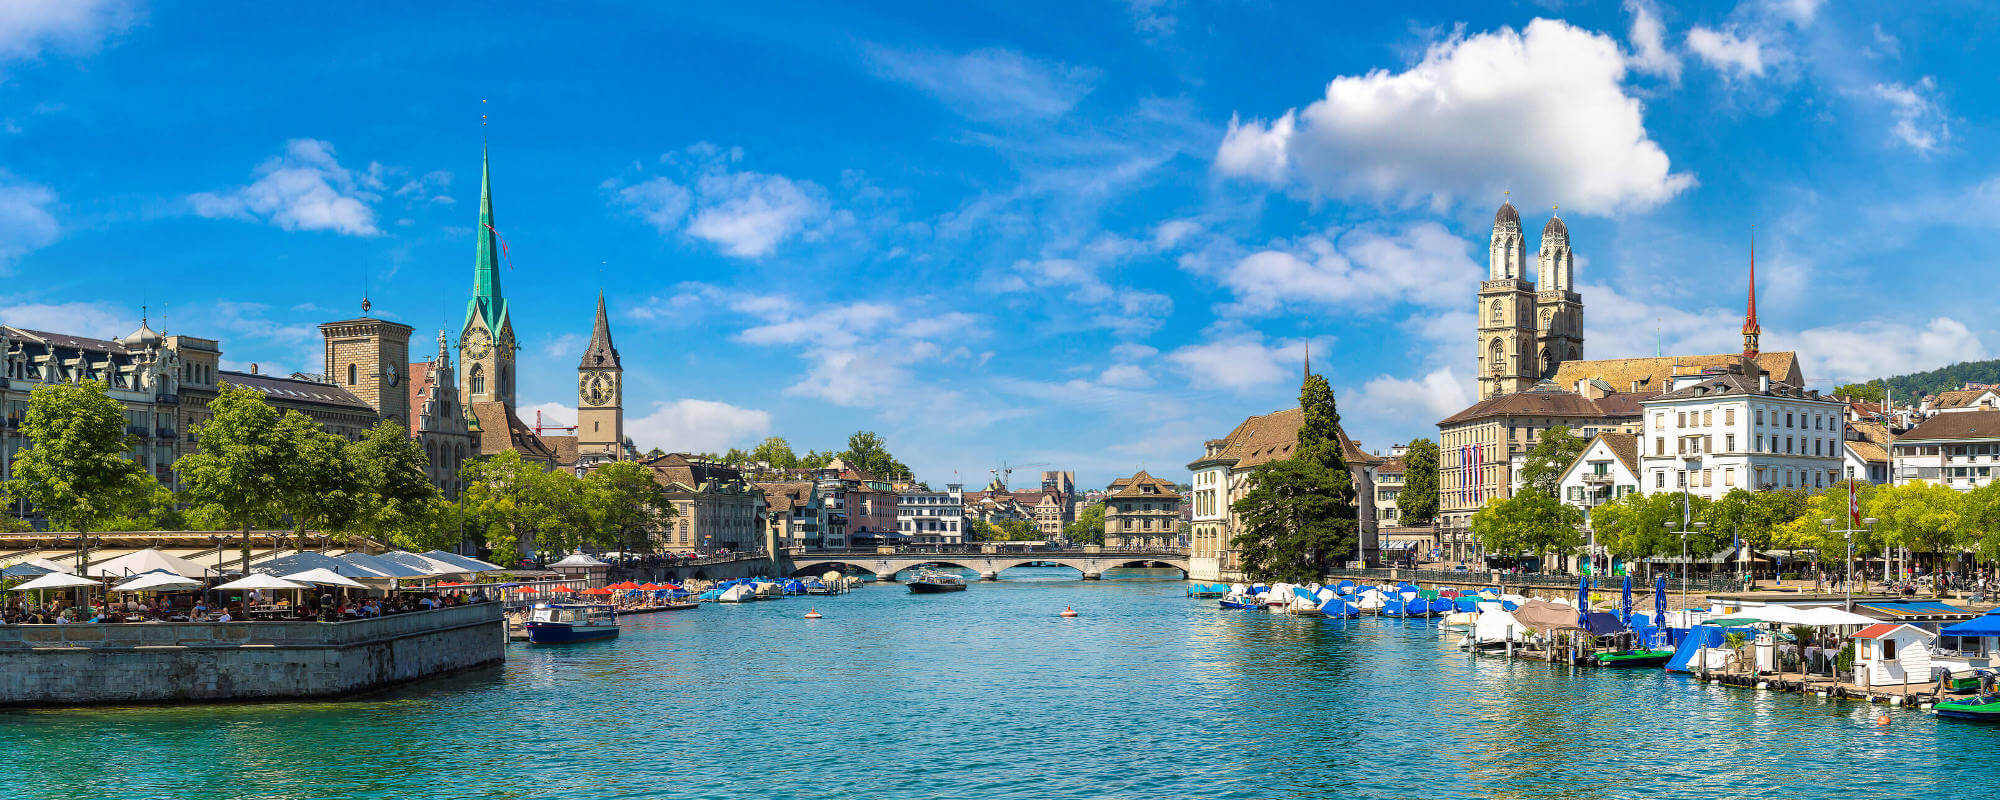 Zurich, Switzerland with Fraumünster and Grossmünster churches visible across the water